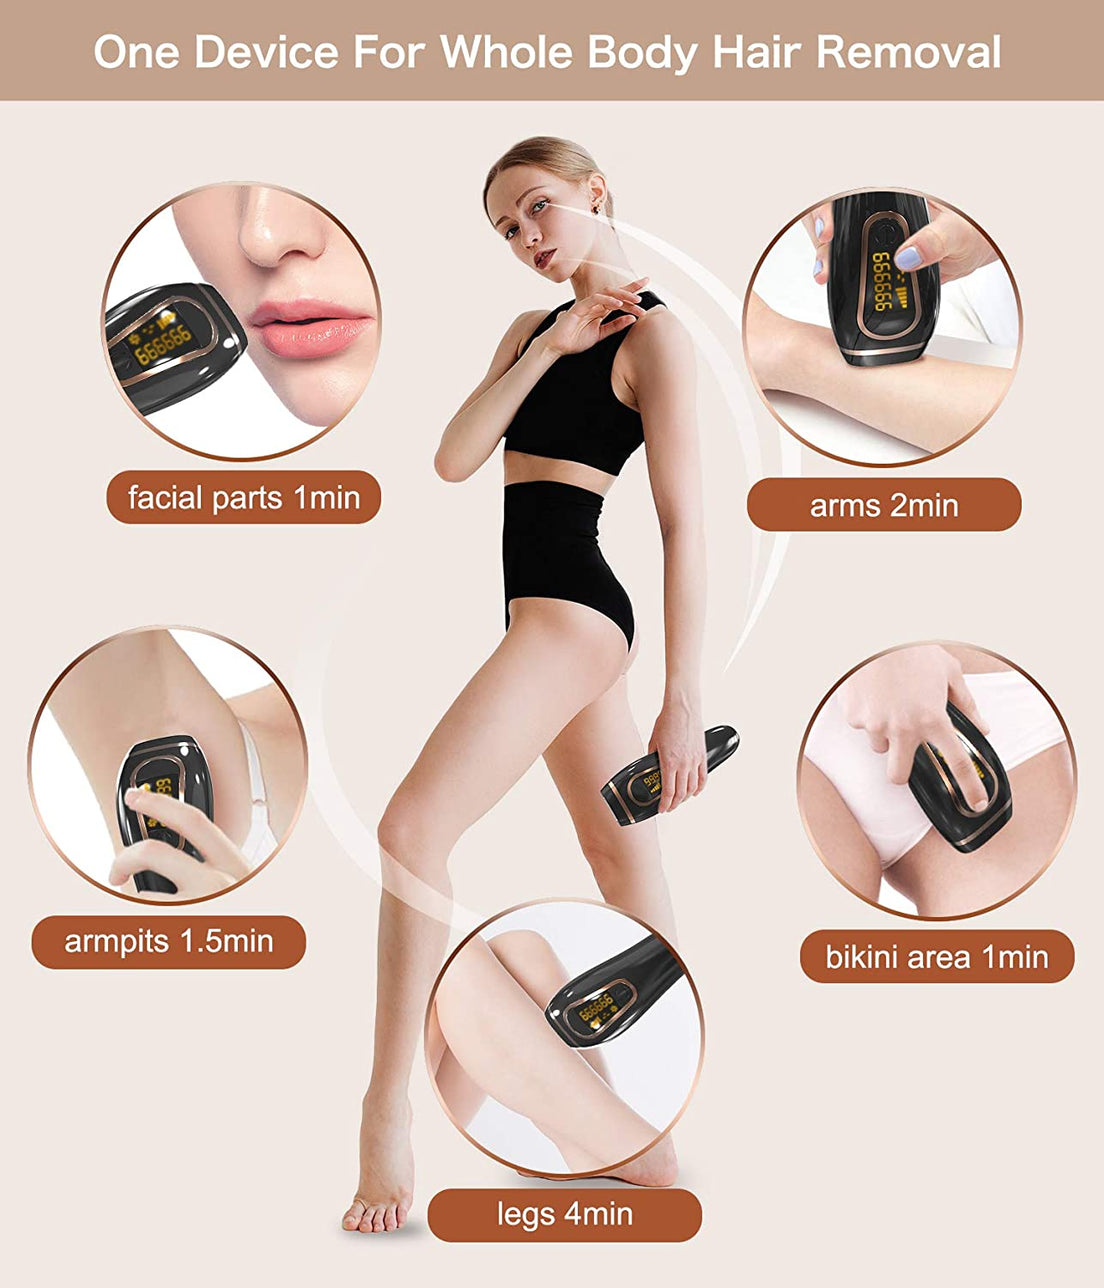 At Home IPL Hair Removal for Women & Men